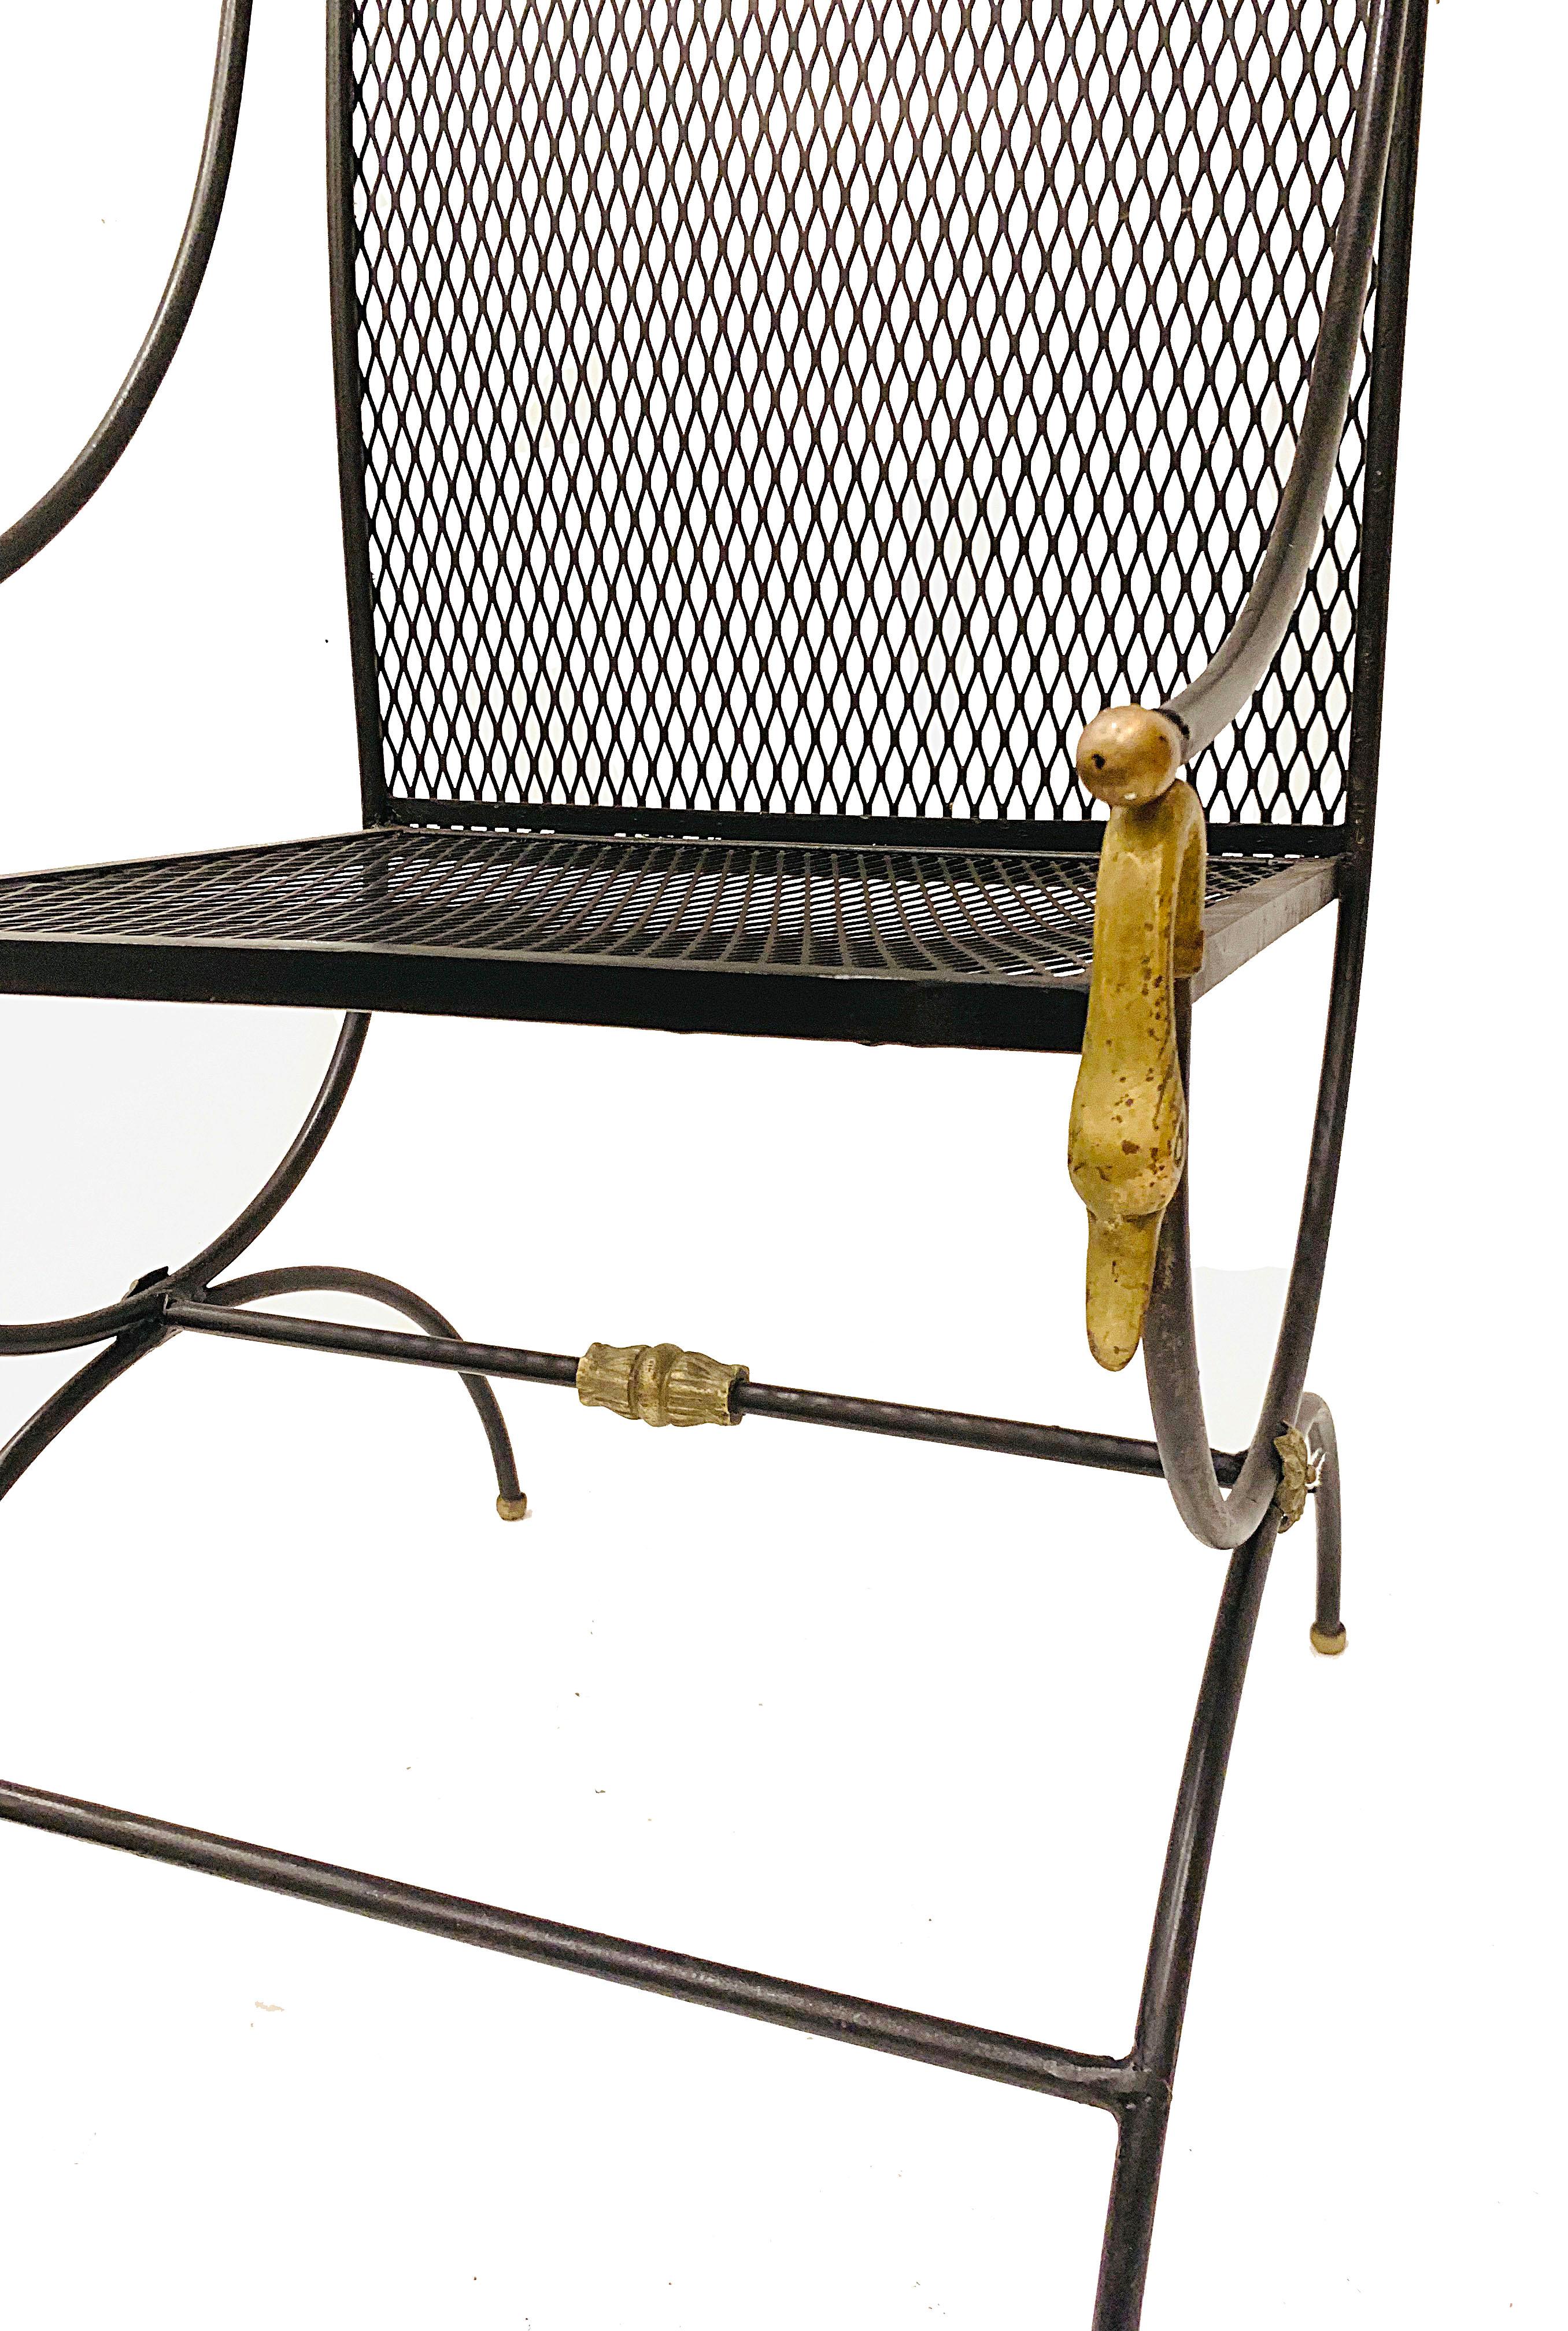 High back metal chair with swan details. Black body and brass swan head ornaments make a nice complement. This chair would look great in a garden, covered porch, as well as indoors.